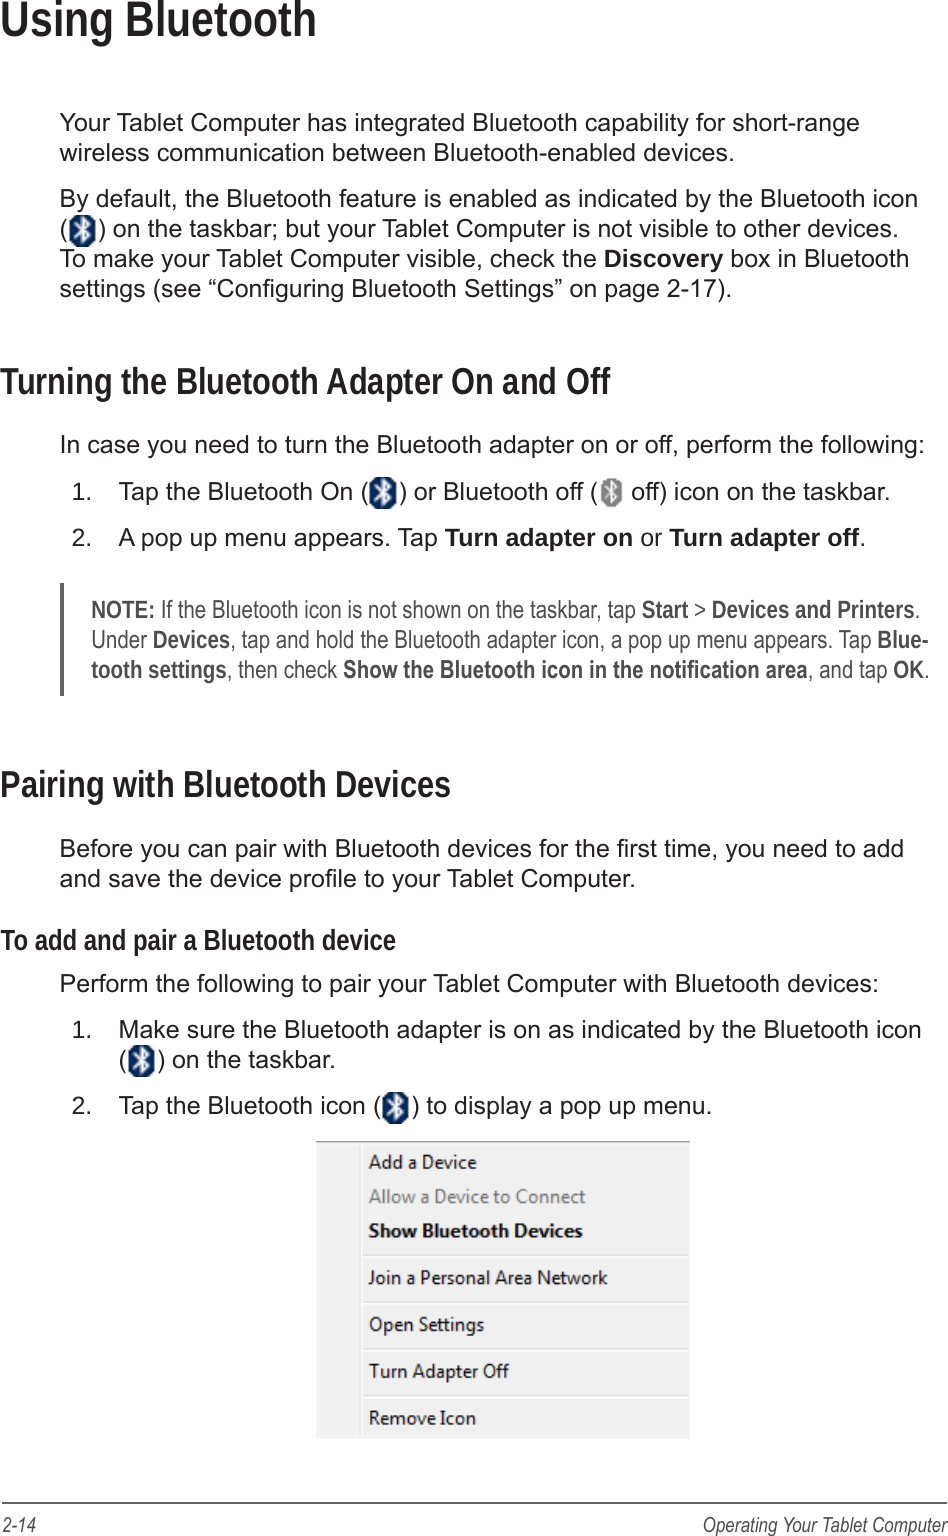 2-14 Operating Your Tablet ComputerUsing BluetoothYour Tablet Computer has integrated Bluetooth capability for short-range wireless communication between Bluetooth-enabled devices.By default, the Bluetooth feature is enabled as indicated by the Bluetooth icon () on the taskbar; but your Tablet Computer is not visible to other devices. To make your Tablet Computer visible, check the Discovery box in Bluetooth settings (see “Conguring Bluetooth Settings” on page 2-17).Turning the Bluetooth Adapter On and OffIn case you need to turn the Bluetooth adapter on or off, perform the following:1.  Tap the Bluetooth On ( ) or Bluetooth off (  off) icon on the taskbar.2.  A pop up menu appears. Tap Turn adapter on or Turn adapter off.NOTE: If the Bluetooth icon is not shown on the taskbar, tap Start &gt; Devices and Printers. Under Devices, tap and hold the Bluetooth adapter icon, a pop up menu appears. Tap Blue-tooth settings, then check Show the Bluetooth icon in the notication area, and tap OK.Pairing with Bluetooth DevicesBefore you can pair with Bluetooth devices for the rst time, you need to add and save the device prole to your Tablet Computer.To add and pair a Bluetooth devicePerform the following to pair your Tablet Computer with Bluetooth devices:1.  Make sure the Bluetooth adapter is on as indicated by the Bluetooth icon  ( ) on the taskbar.2.  Tap the Bluetooth icon ( ) to display a pop up menu.